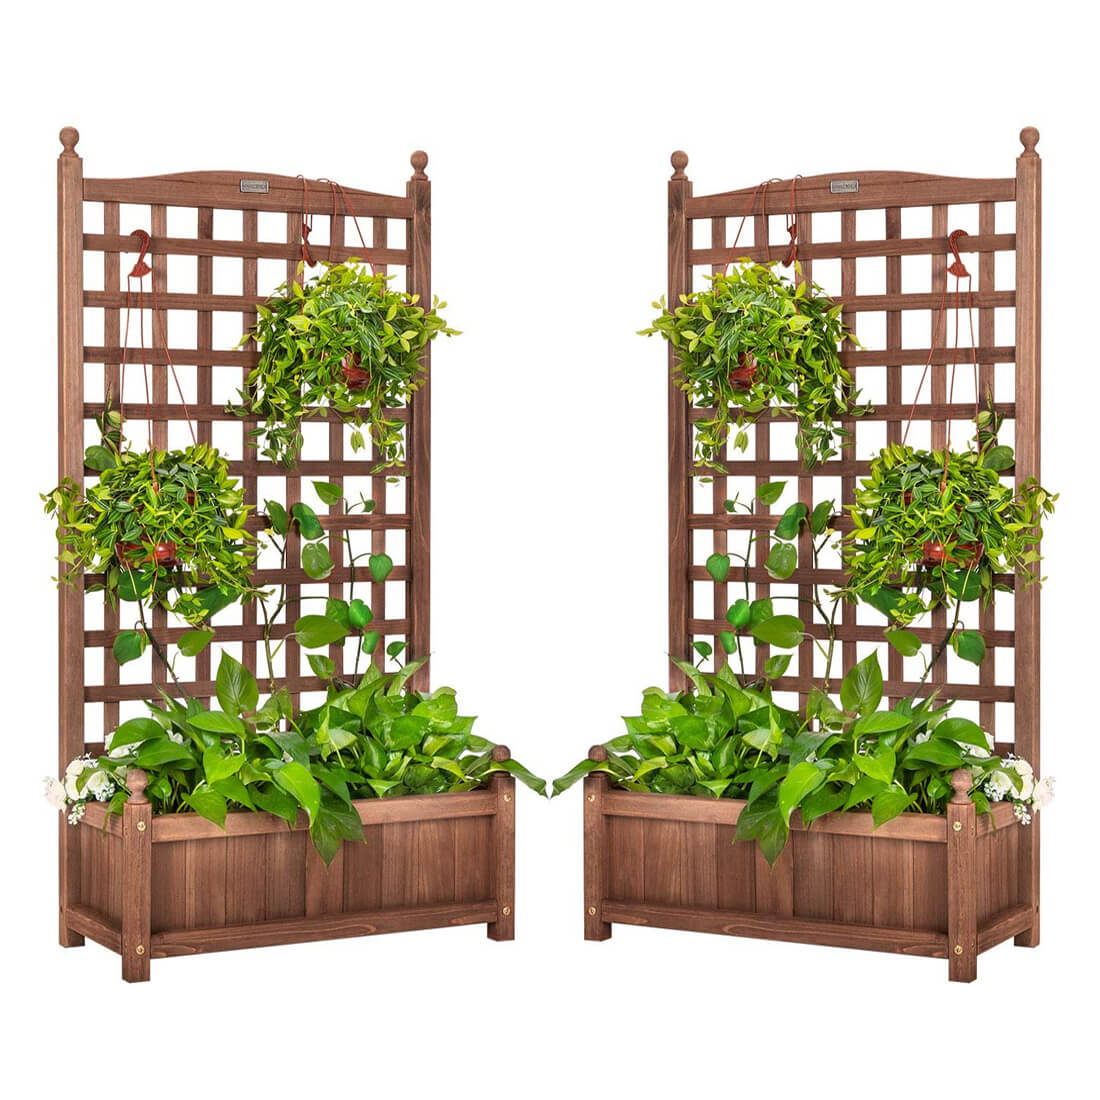  VIVOHOME Pack of 2 Wood Planter Raised Beds with Trellis, 48 Inch Height Free-Standing Planters for Garden Yard